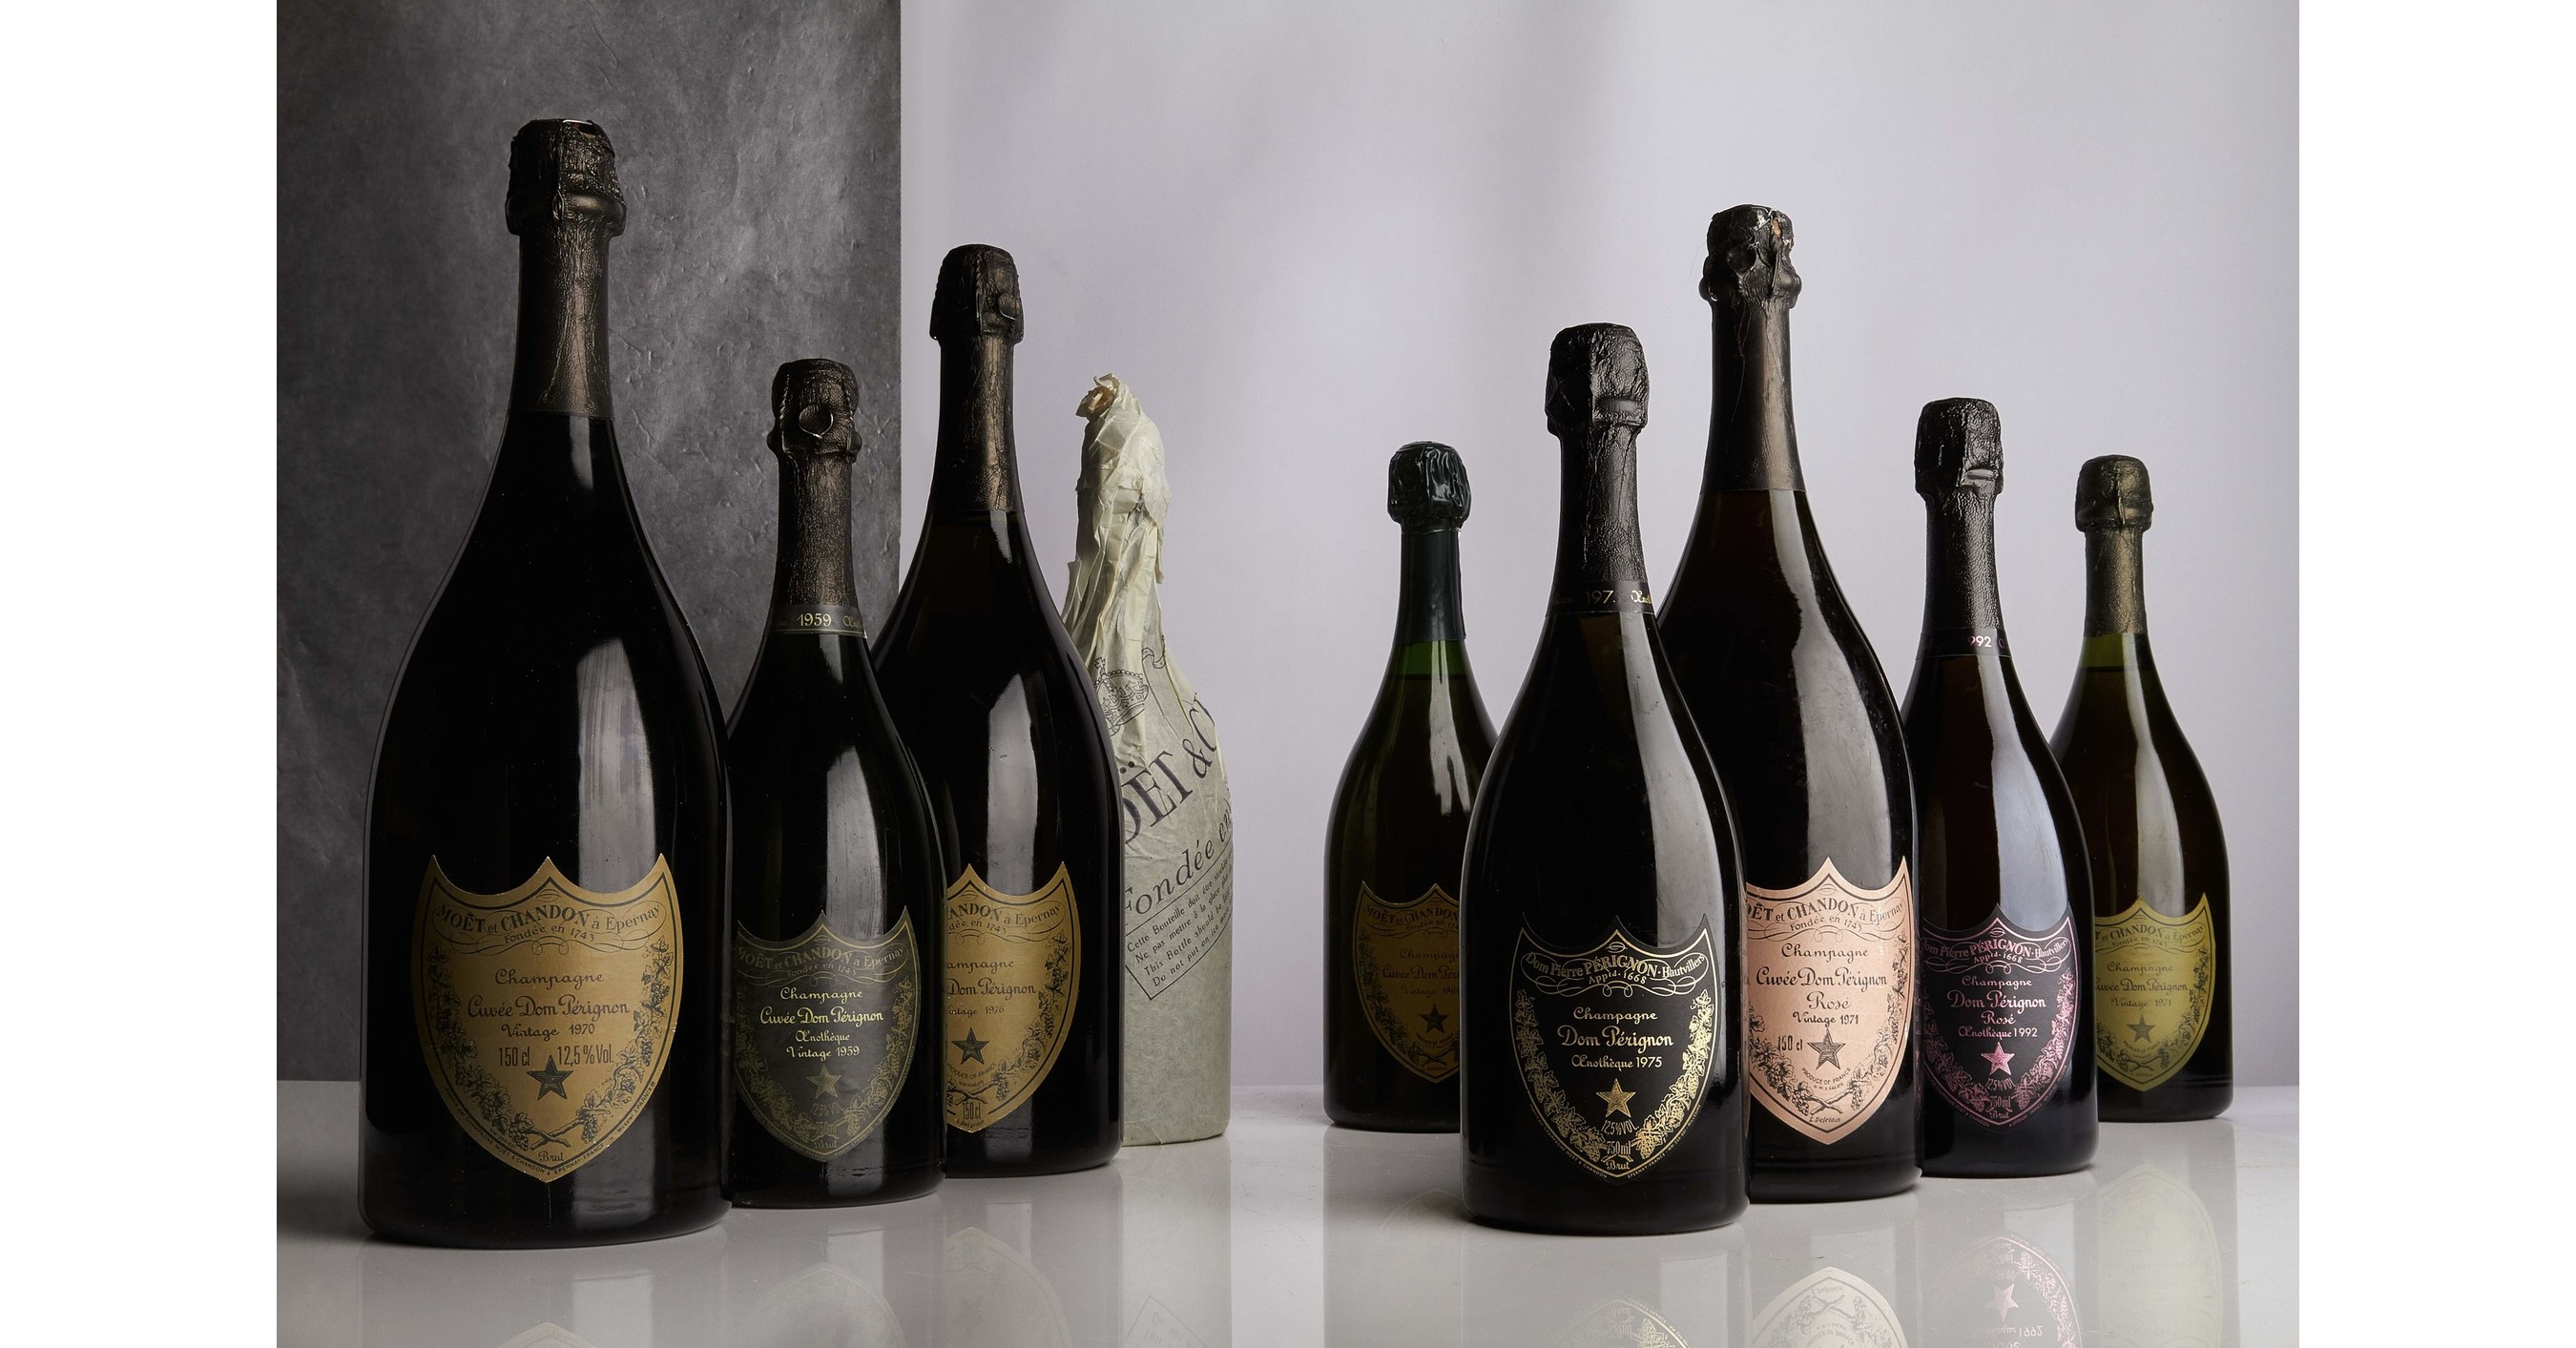 A Sparkling Opportunity? Investments In Champagne And Beyond With